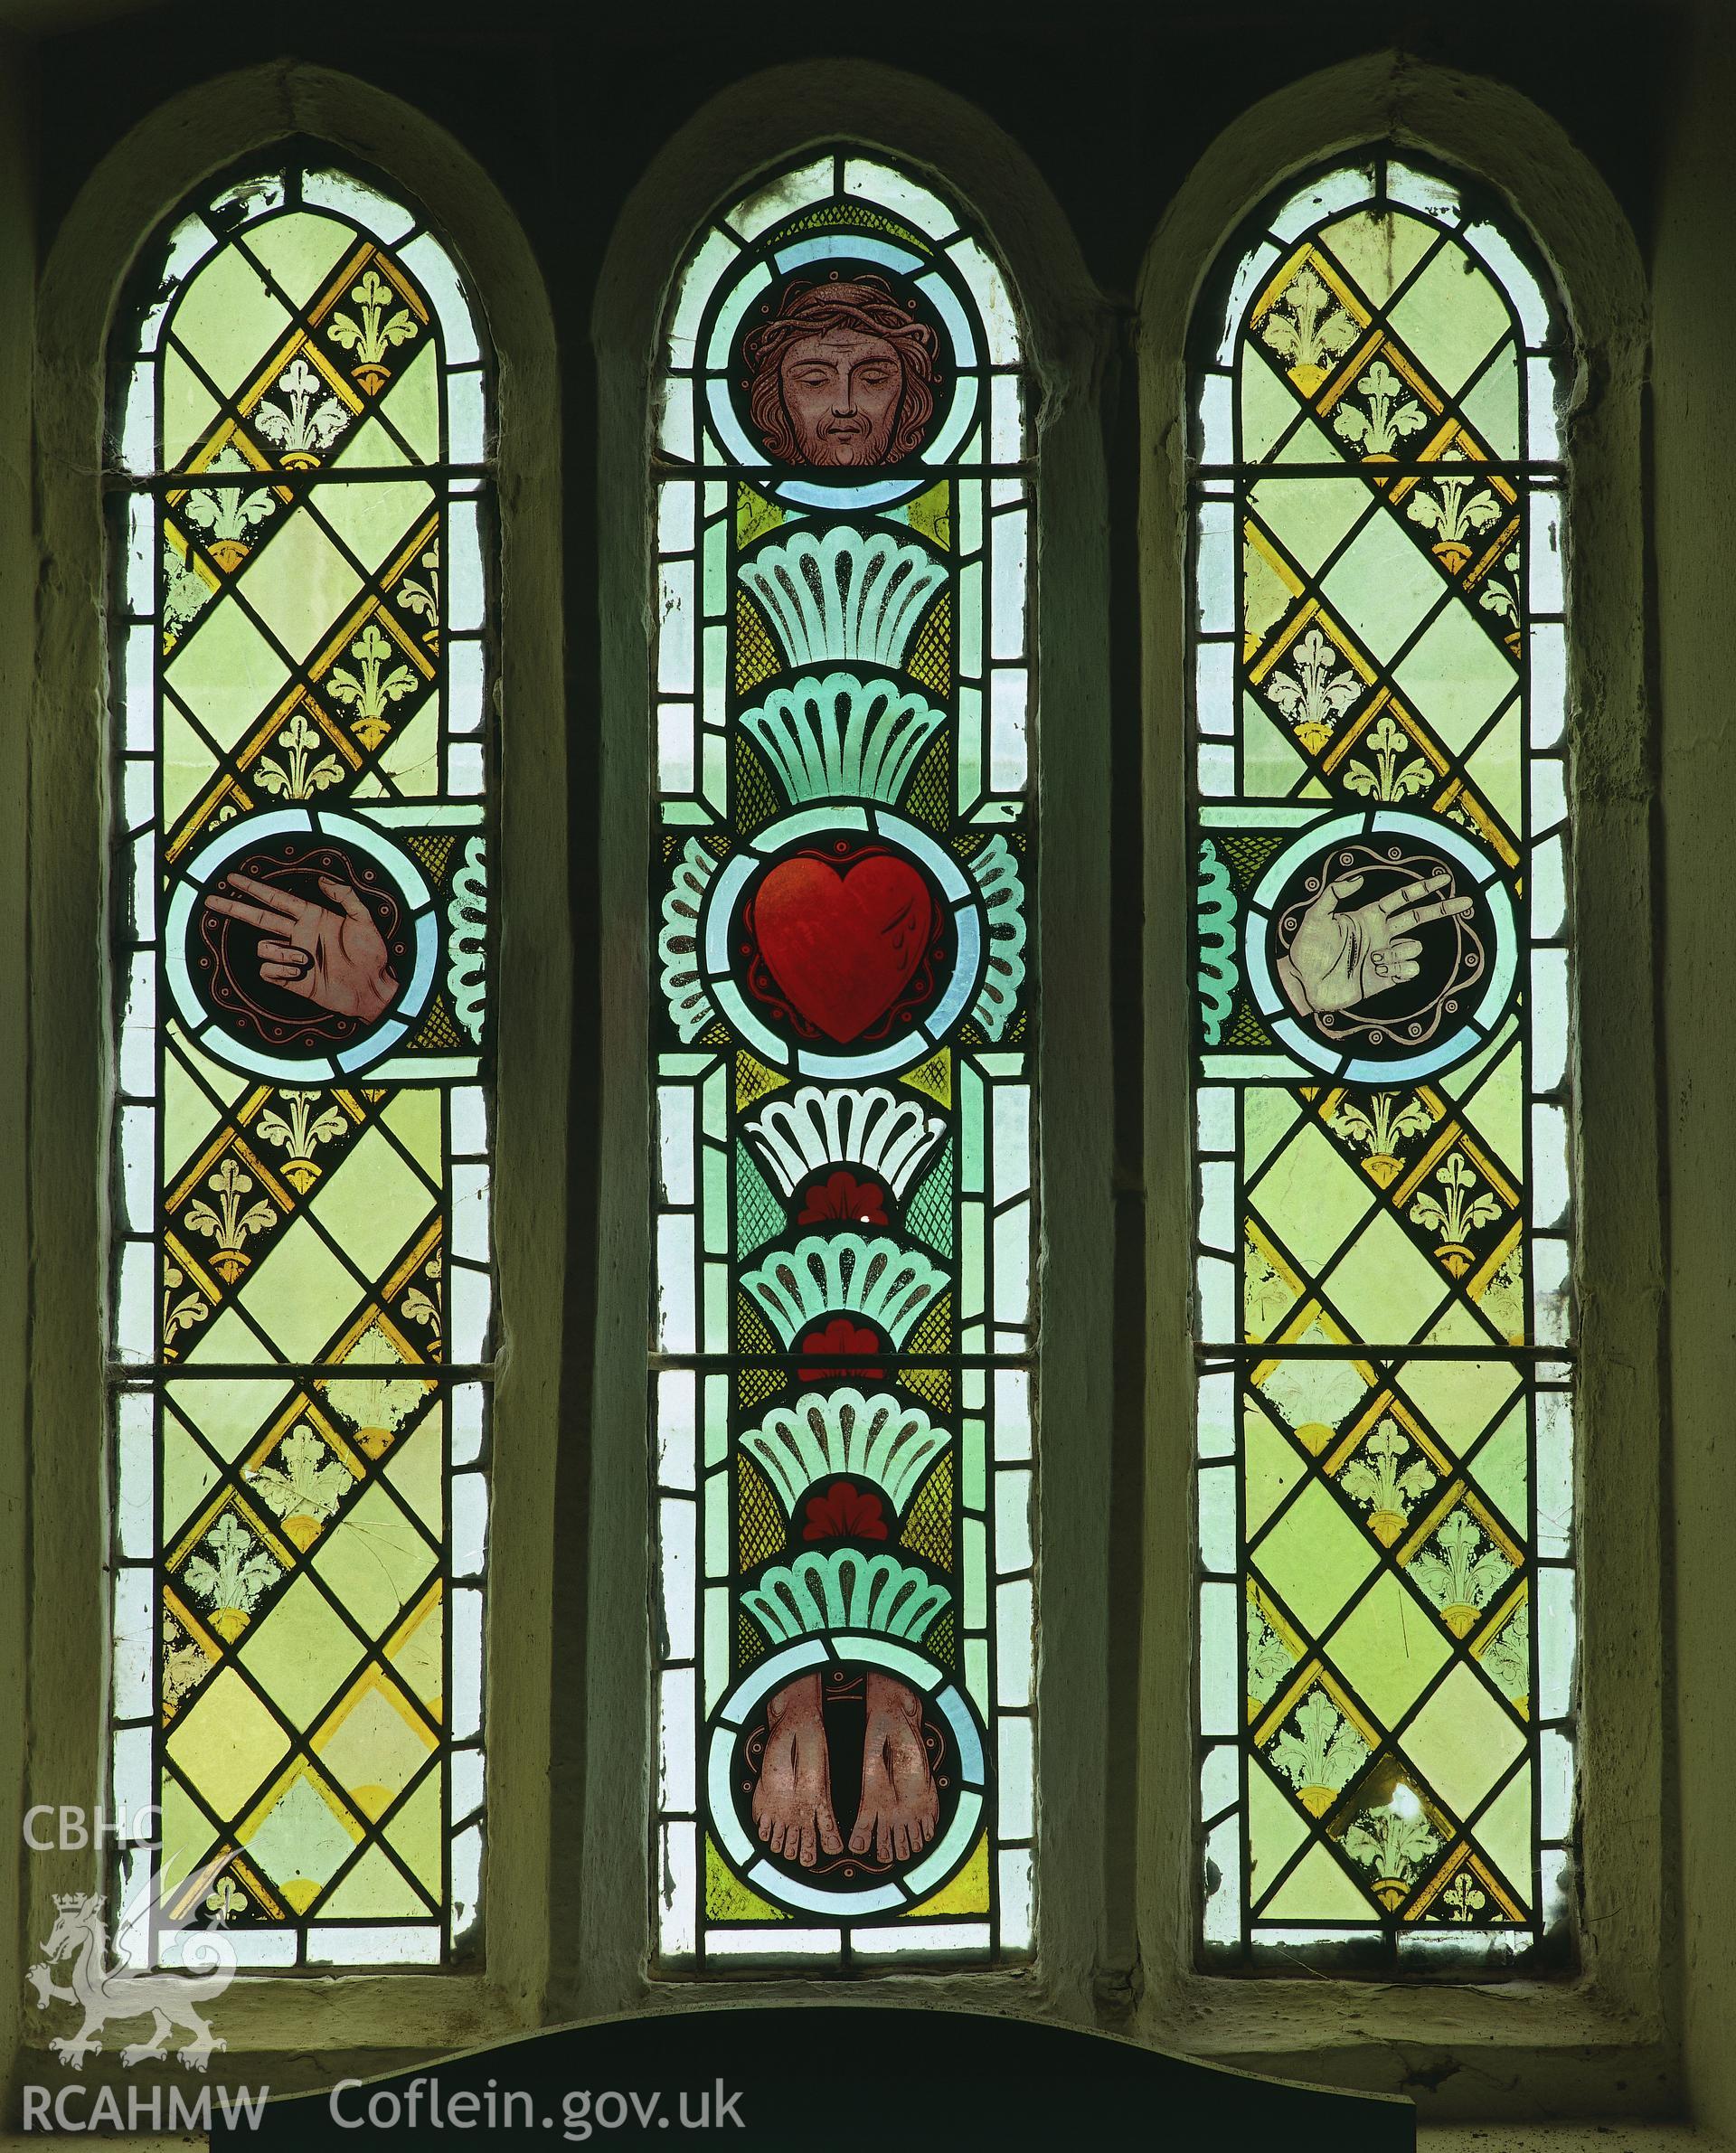 RCAHMW colour transparency showing stained glass window at St Cynwyl's Church, Cynwyl Elfed.